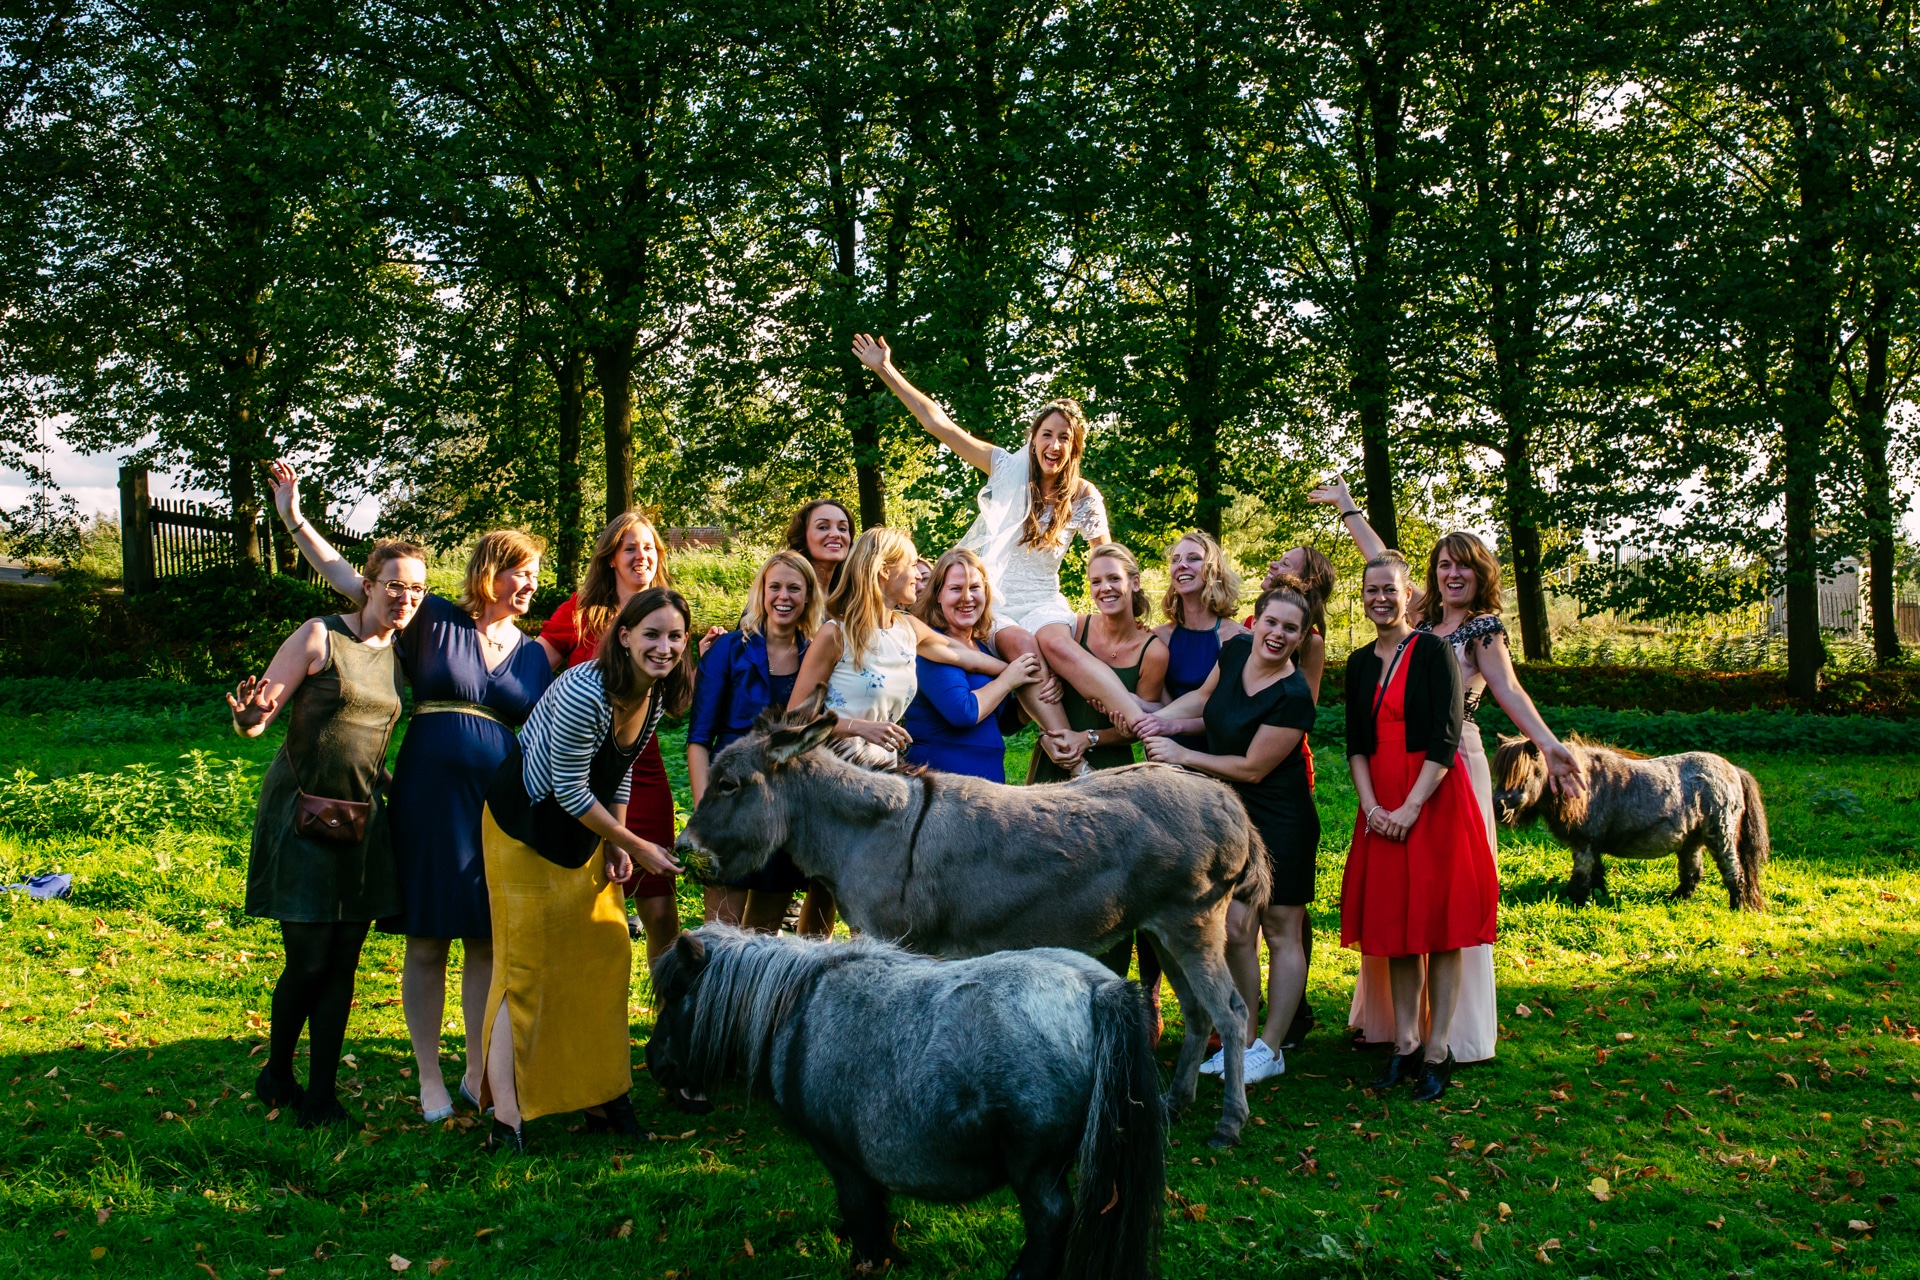 A group of women start posing with donkeys in a field to plan their wedding.